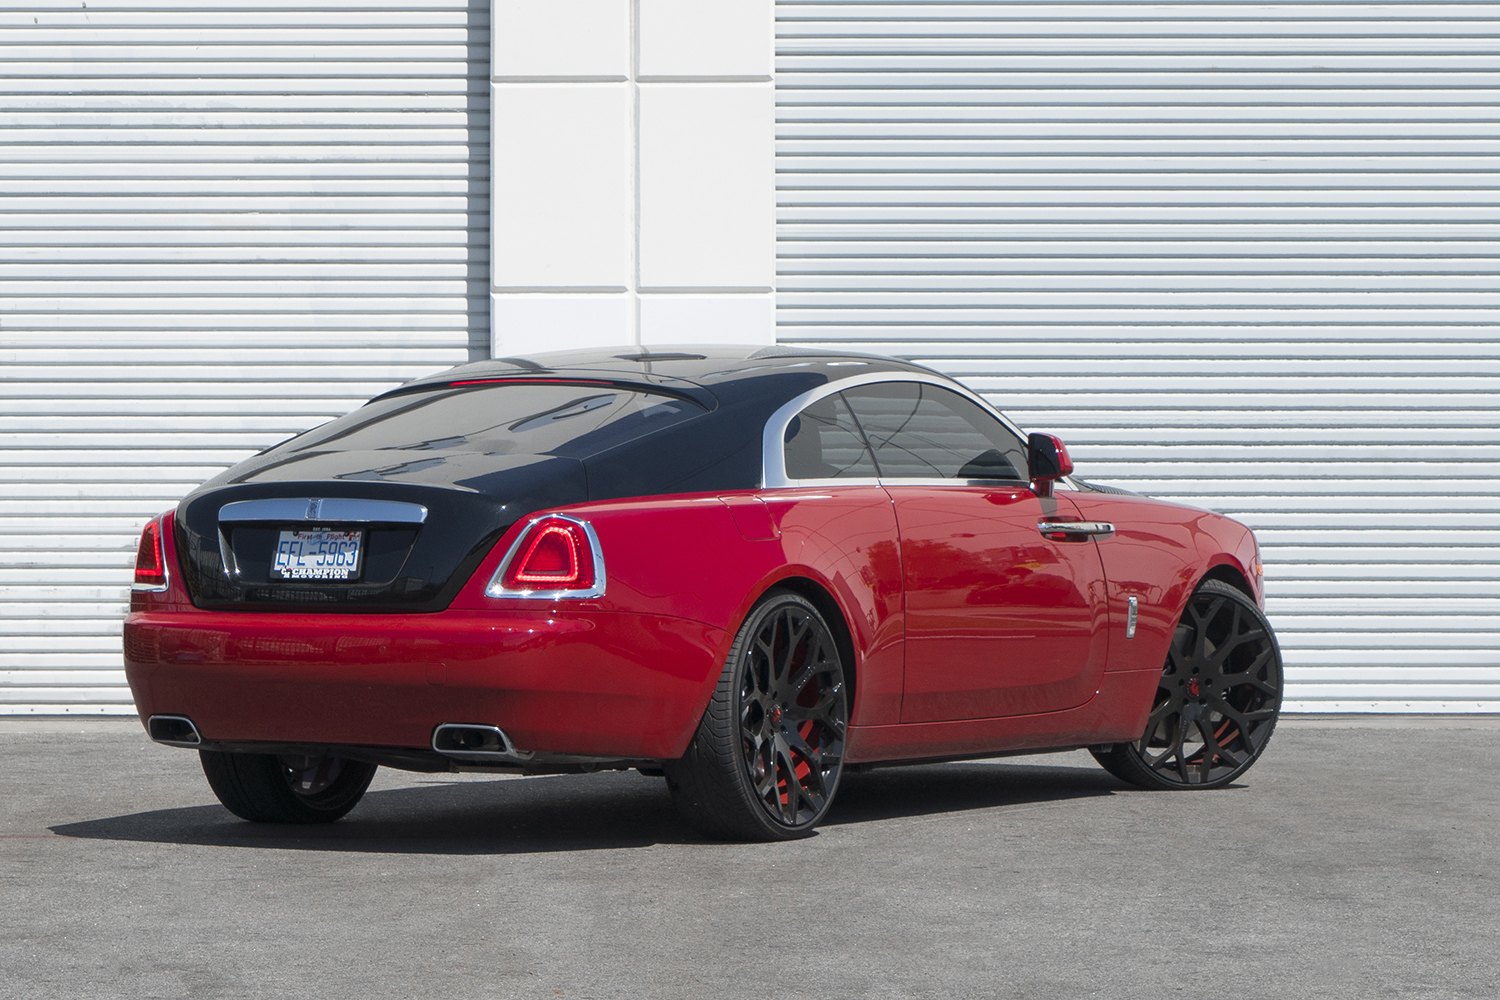 Aftermarket Chrome Trim on Red Rolls Royce Wraith - Photo by Forgiato